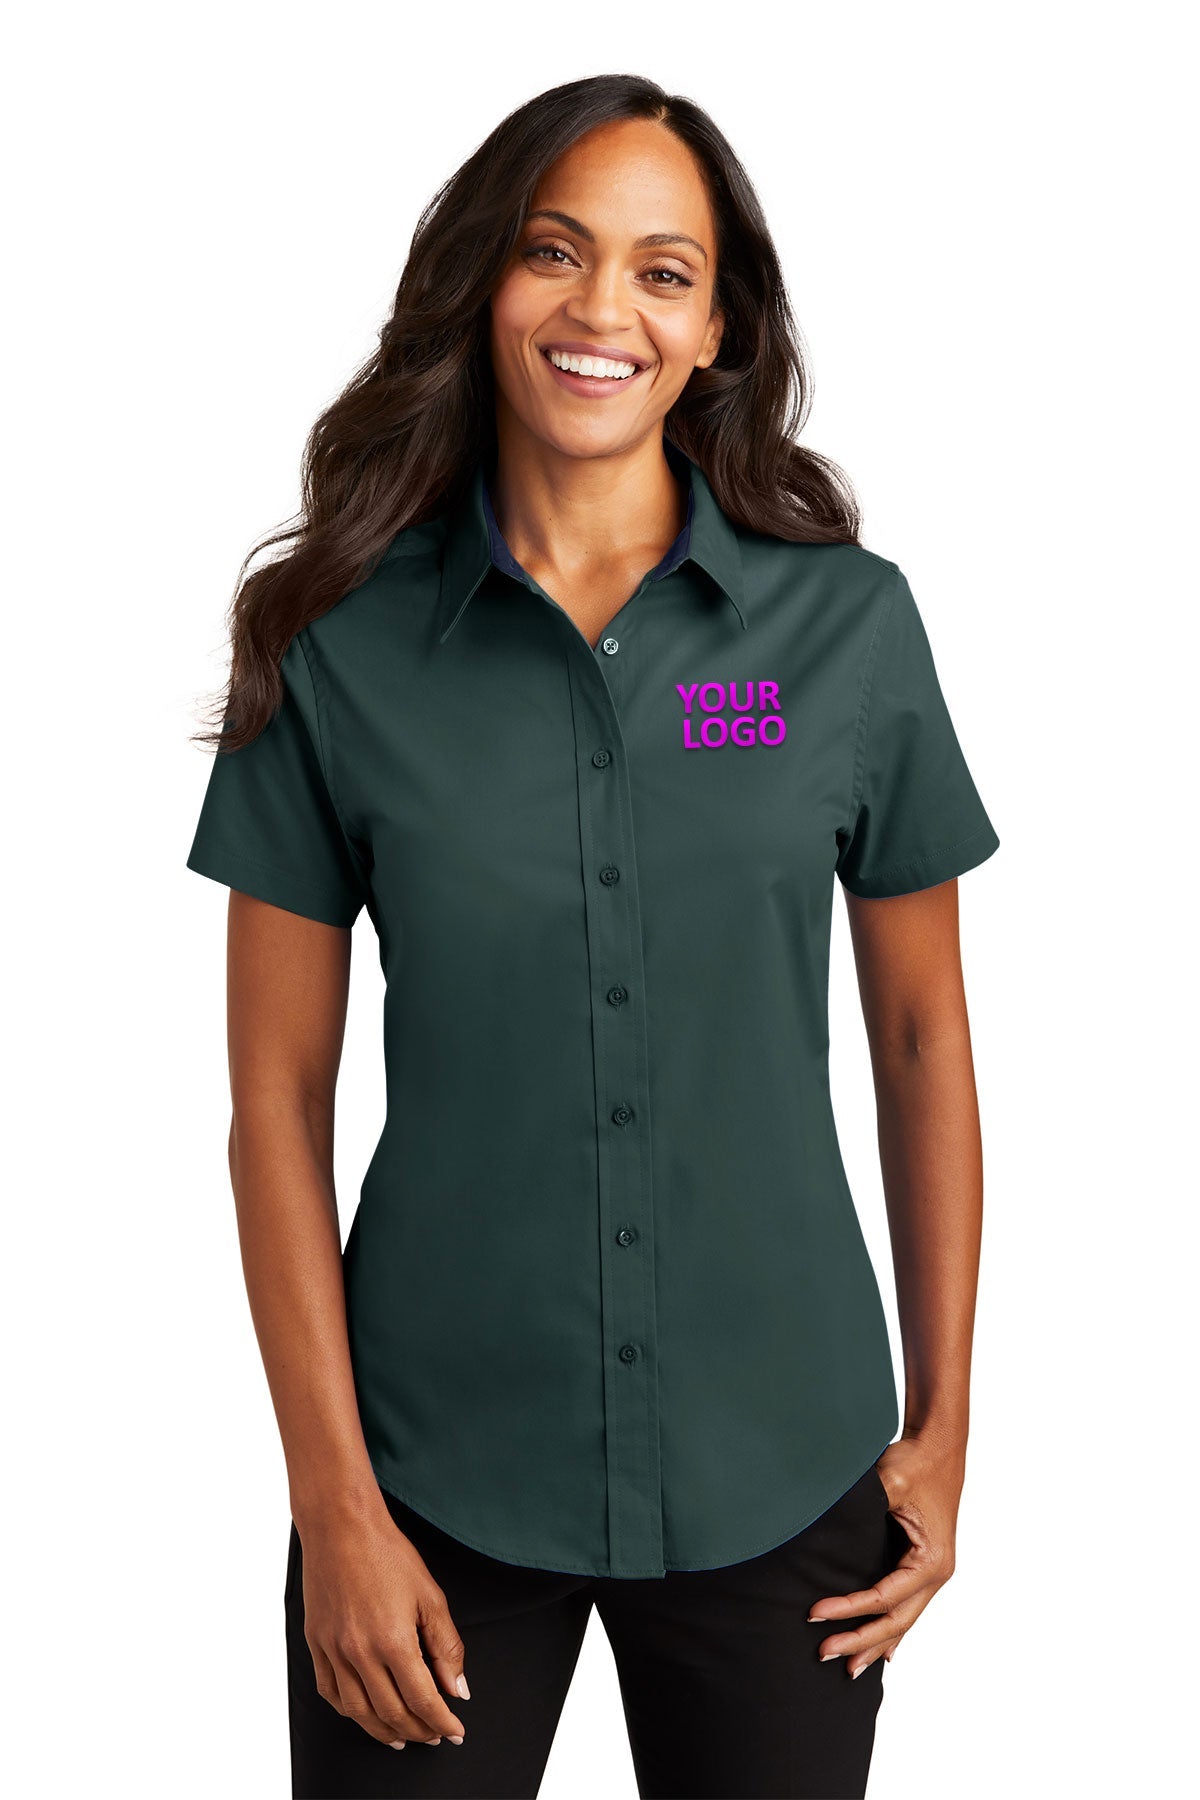 Port Authority Dark Green/Navy L508 order embroidered polo shirts